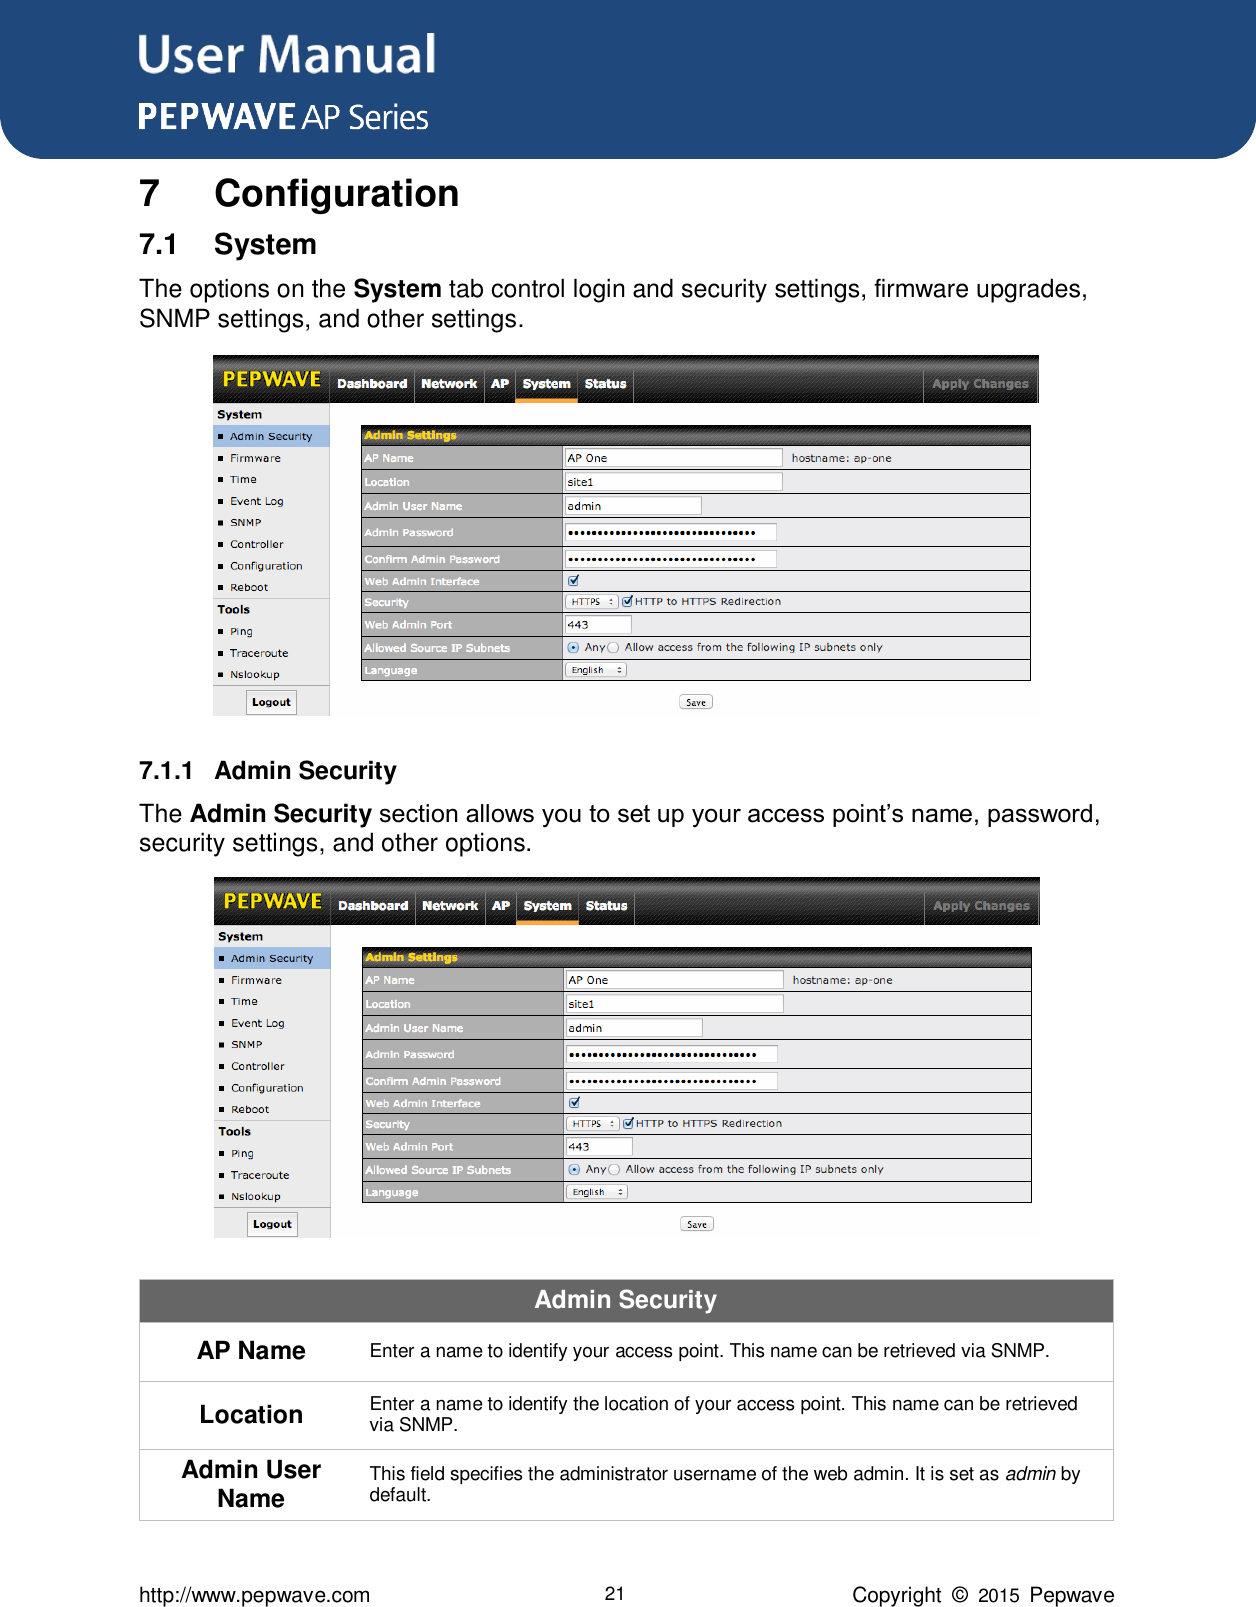 User Manual      http://www.pepwave.com 21 Copyright  ©  2015  Pepwave 7  Configuration 7.1  System The options on the System tab control login and security settings, firmware upgrades, SNMP settings, and other settings.  7.1.1  Admin Security The Admin Security section allows you to set up your access point’s name, password, security settings, and other options.  Admin Security AP Name Enter a name to identify your access point. This name can be retrieved via SNMP. Location Enter a name to identify the location of your access point. This name can be retrieved via SNMP. Admin User Name This field specifies the administrator username of the web admin. It is set as admin by default. 